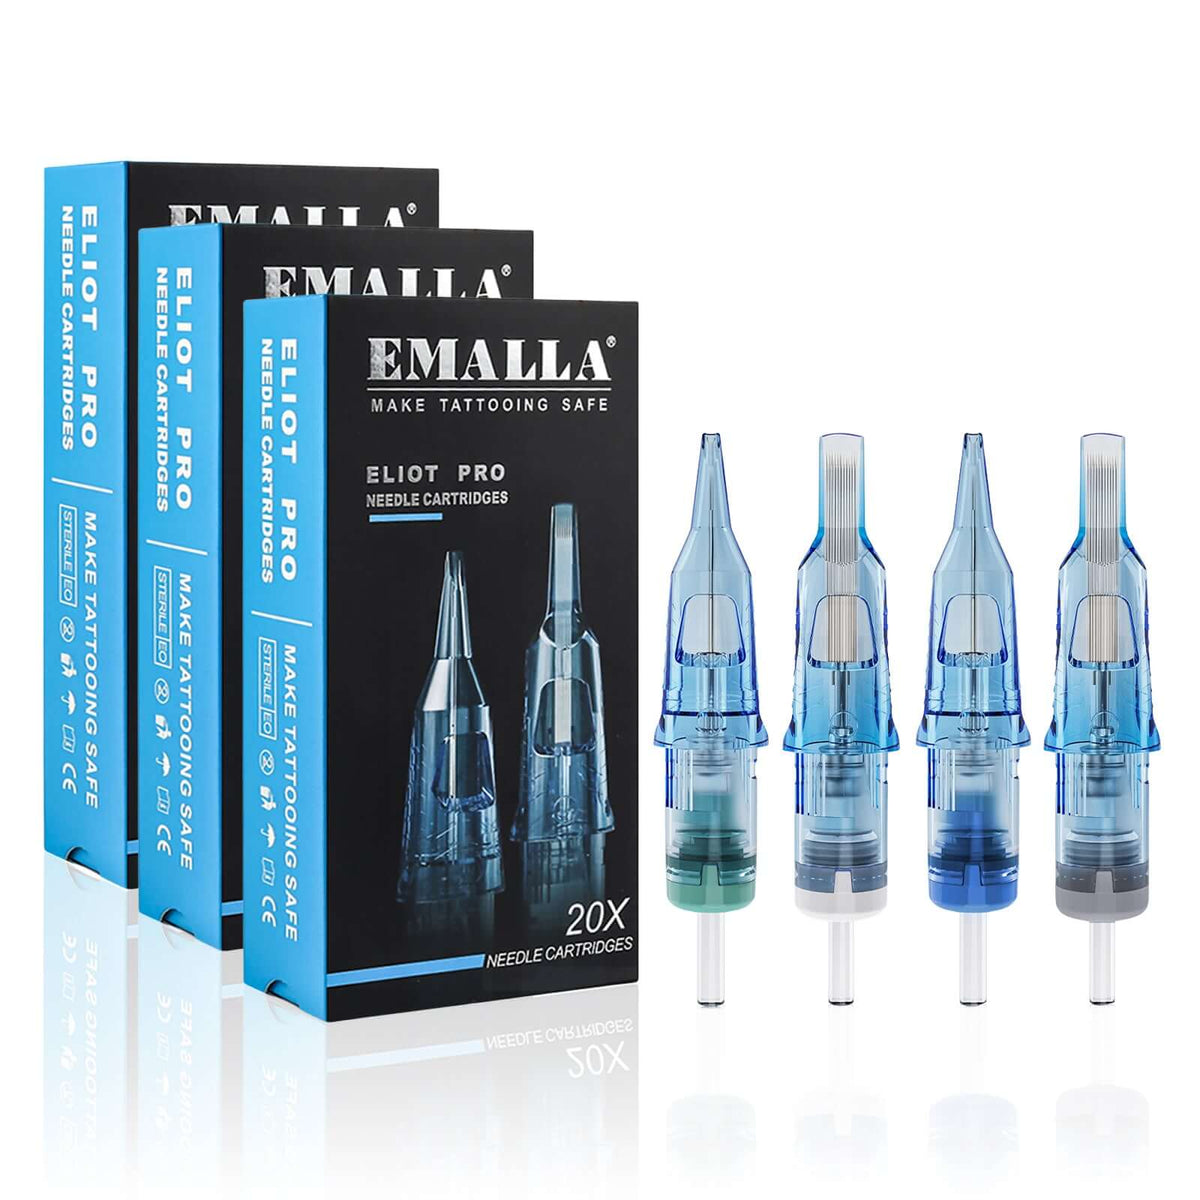 Package of EMALLA ELIOT PRO Tattoo Cartridge Needles Mixed Sizes from front view